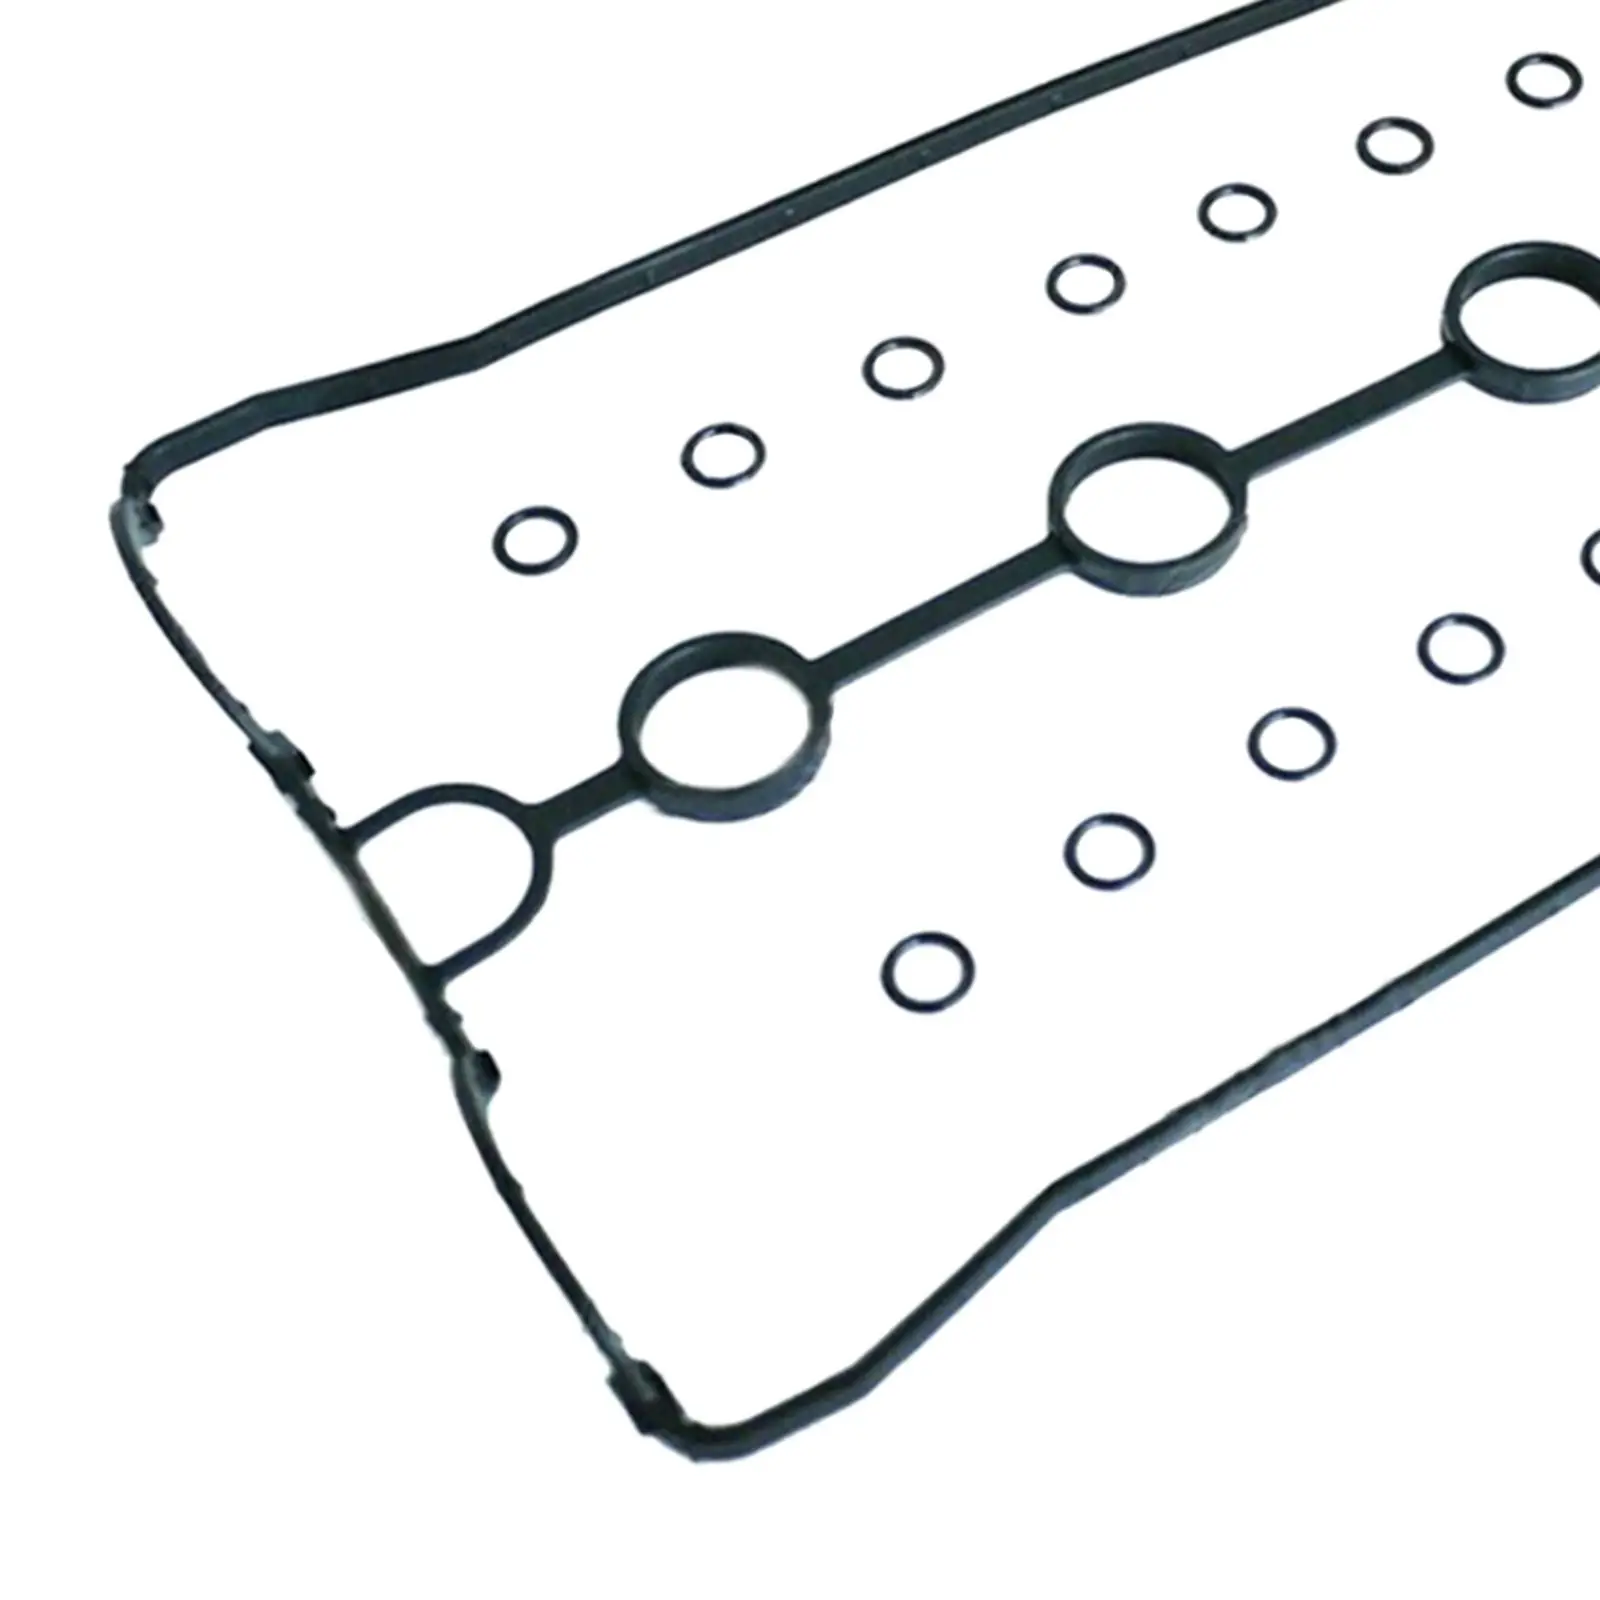 Automotive Engine Valve Cover Gasket 96353002 Parts Rubber for Chevrolet Aveo